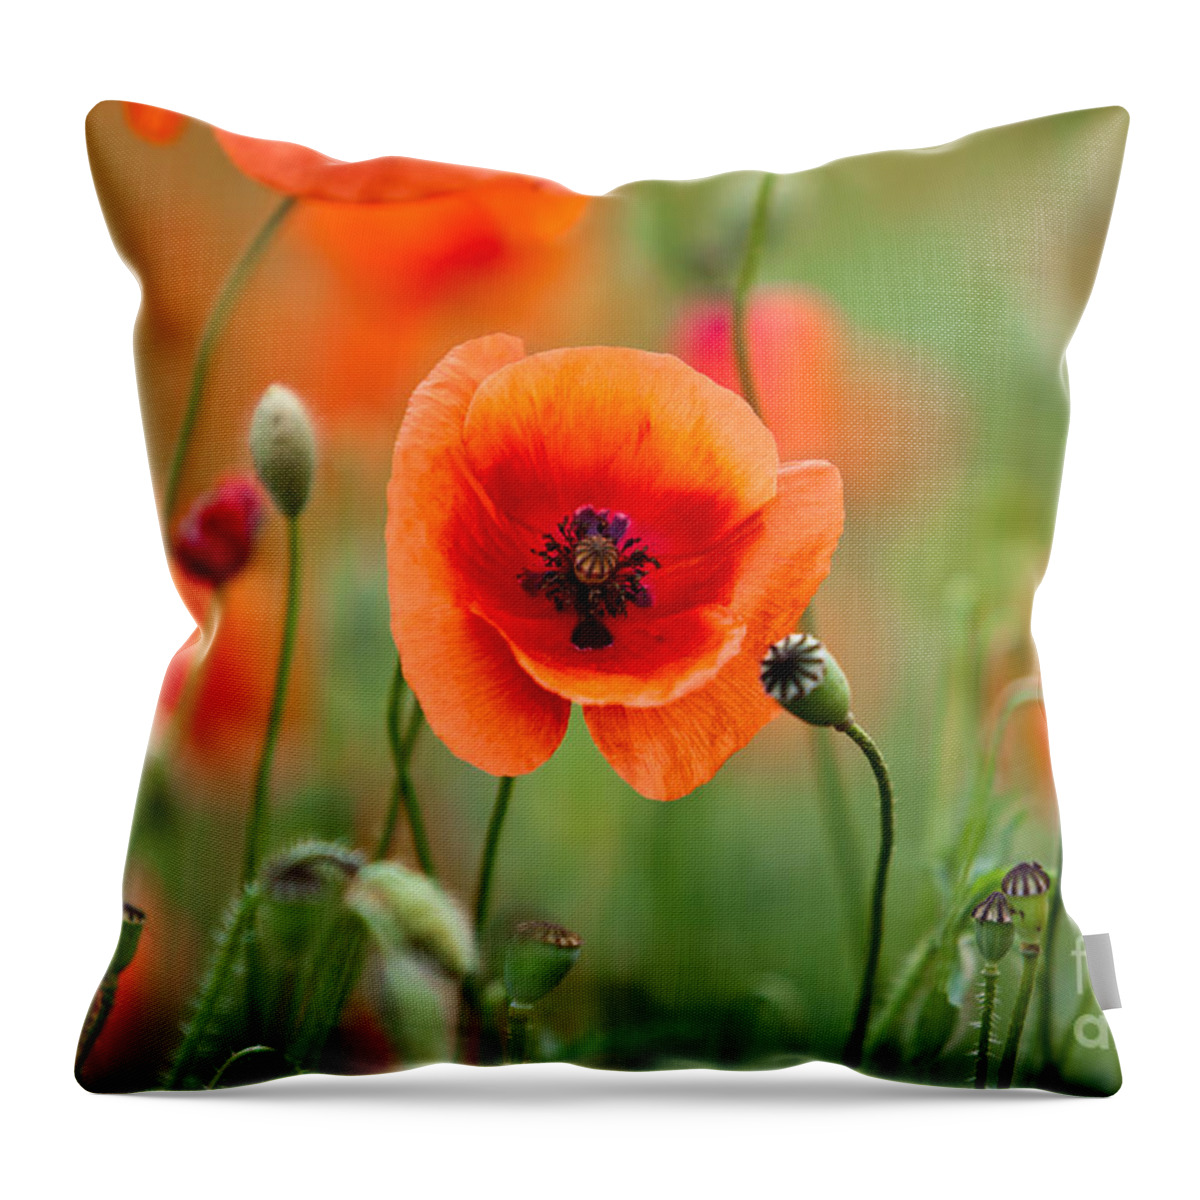 Poppy Throw Pillow featuring the photograph Red Corn Poppy Flowers 07 by Nailia Schwarz